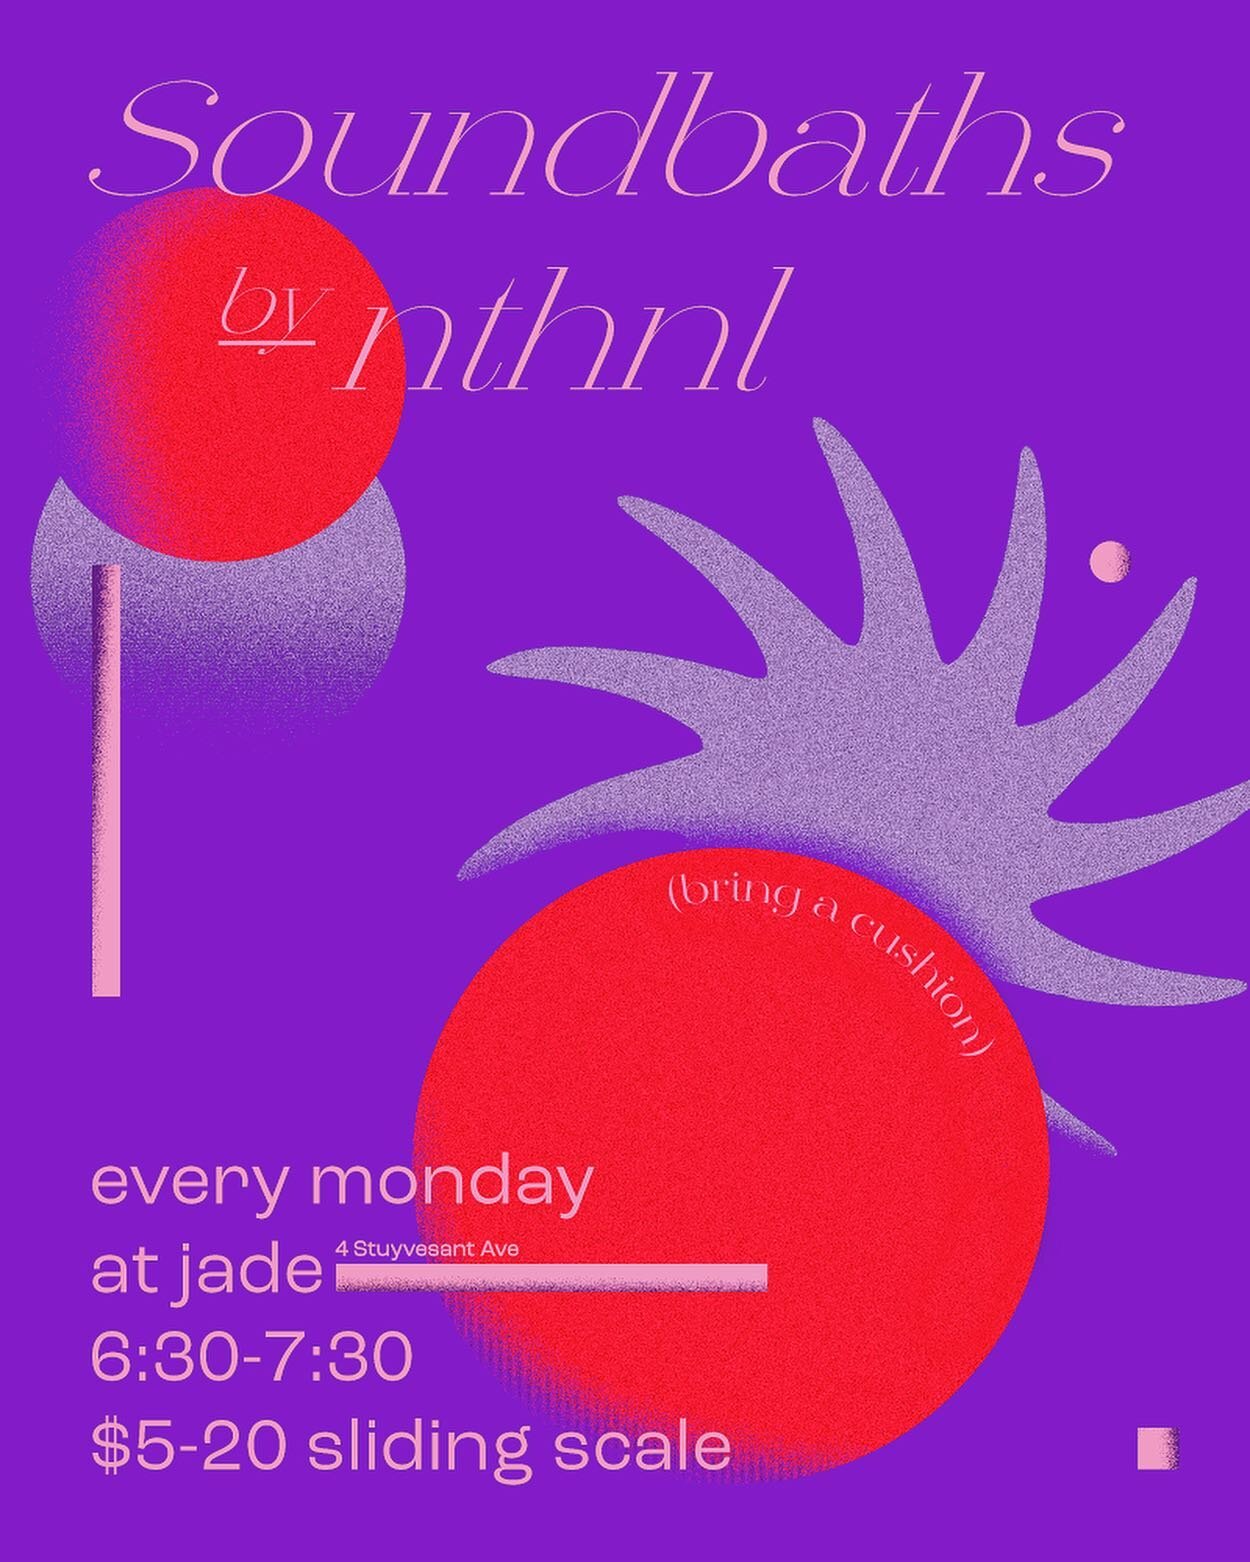 Starting next week every Monday from 6:30-7:30 I&rsquo;ll be hosting a Soundbath at @bar.jade.bk 
&bull;
Hope to see you there, it&rsquo;s a lovely time and you will feel great after and during!